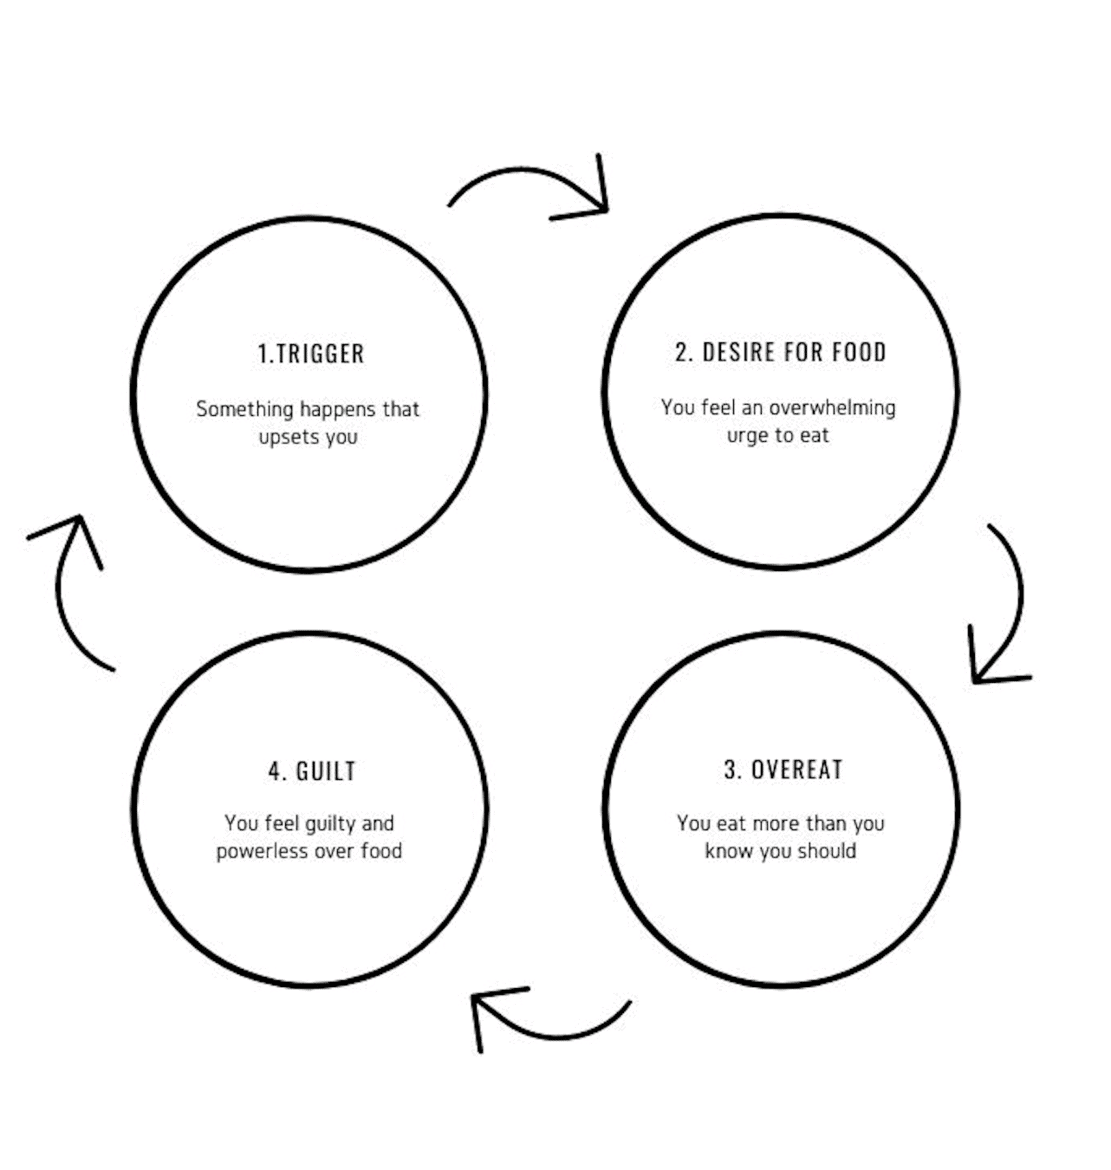 emotional eating cycle showing 4 steps that trigger us to overeat and feel guilt afterwards